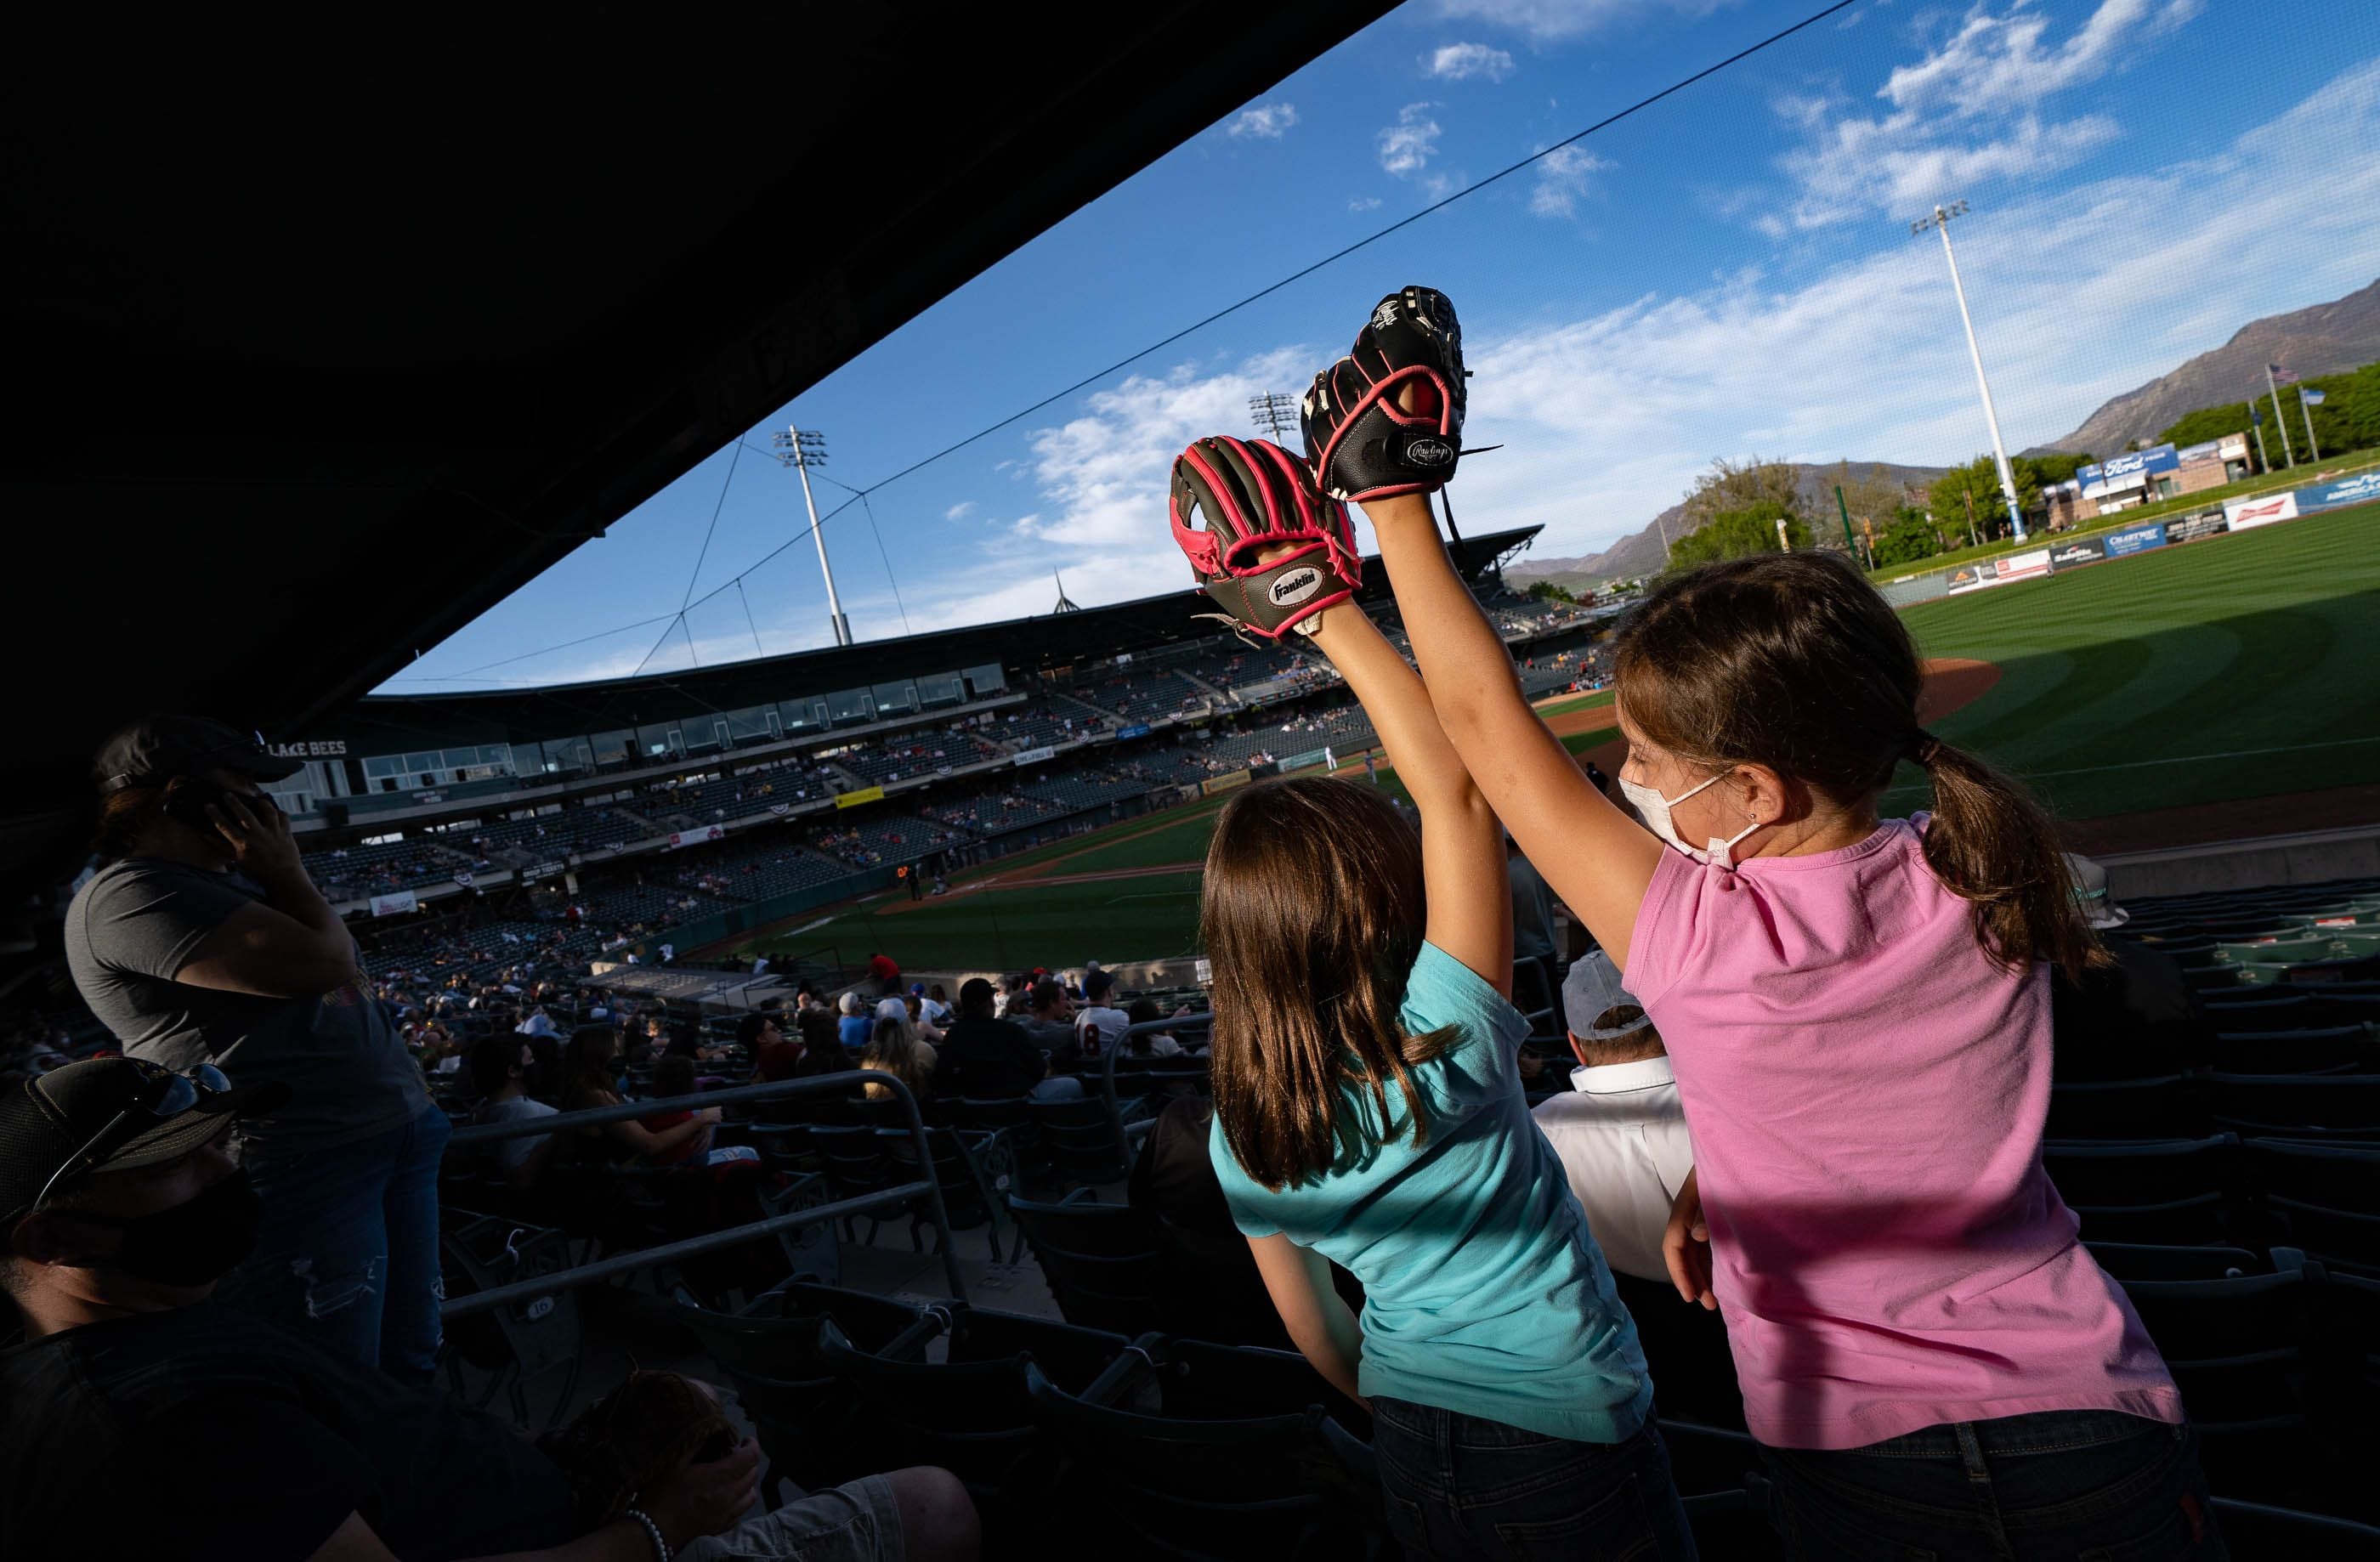 Salt Lake Bees to play first game of 2021 season Thursday evening